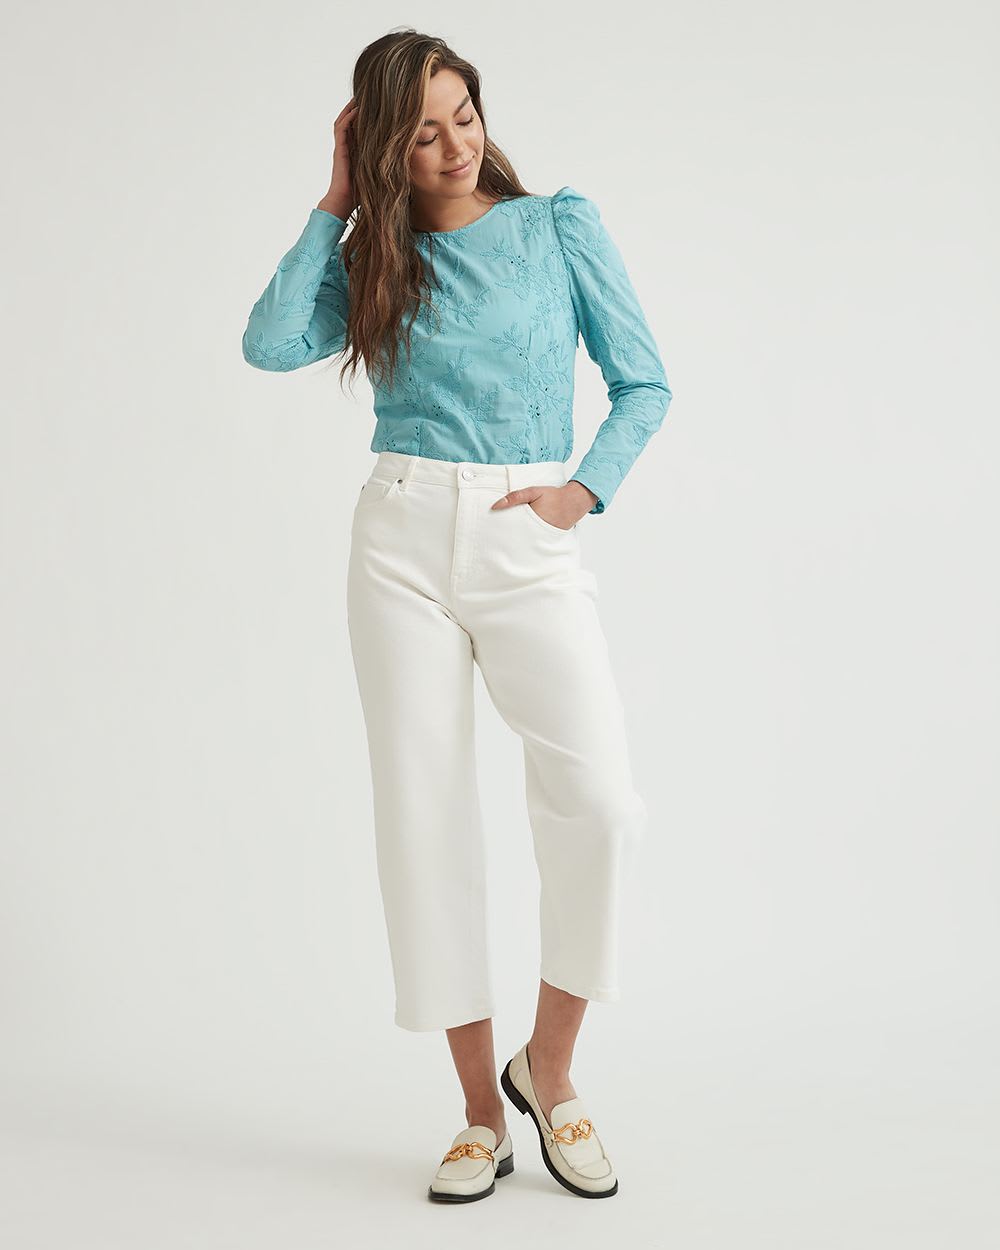 Embroidered Crew-Neck Long Sleeve Blouse with Shirring at Shoulders